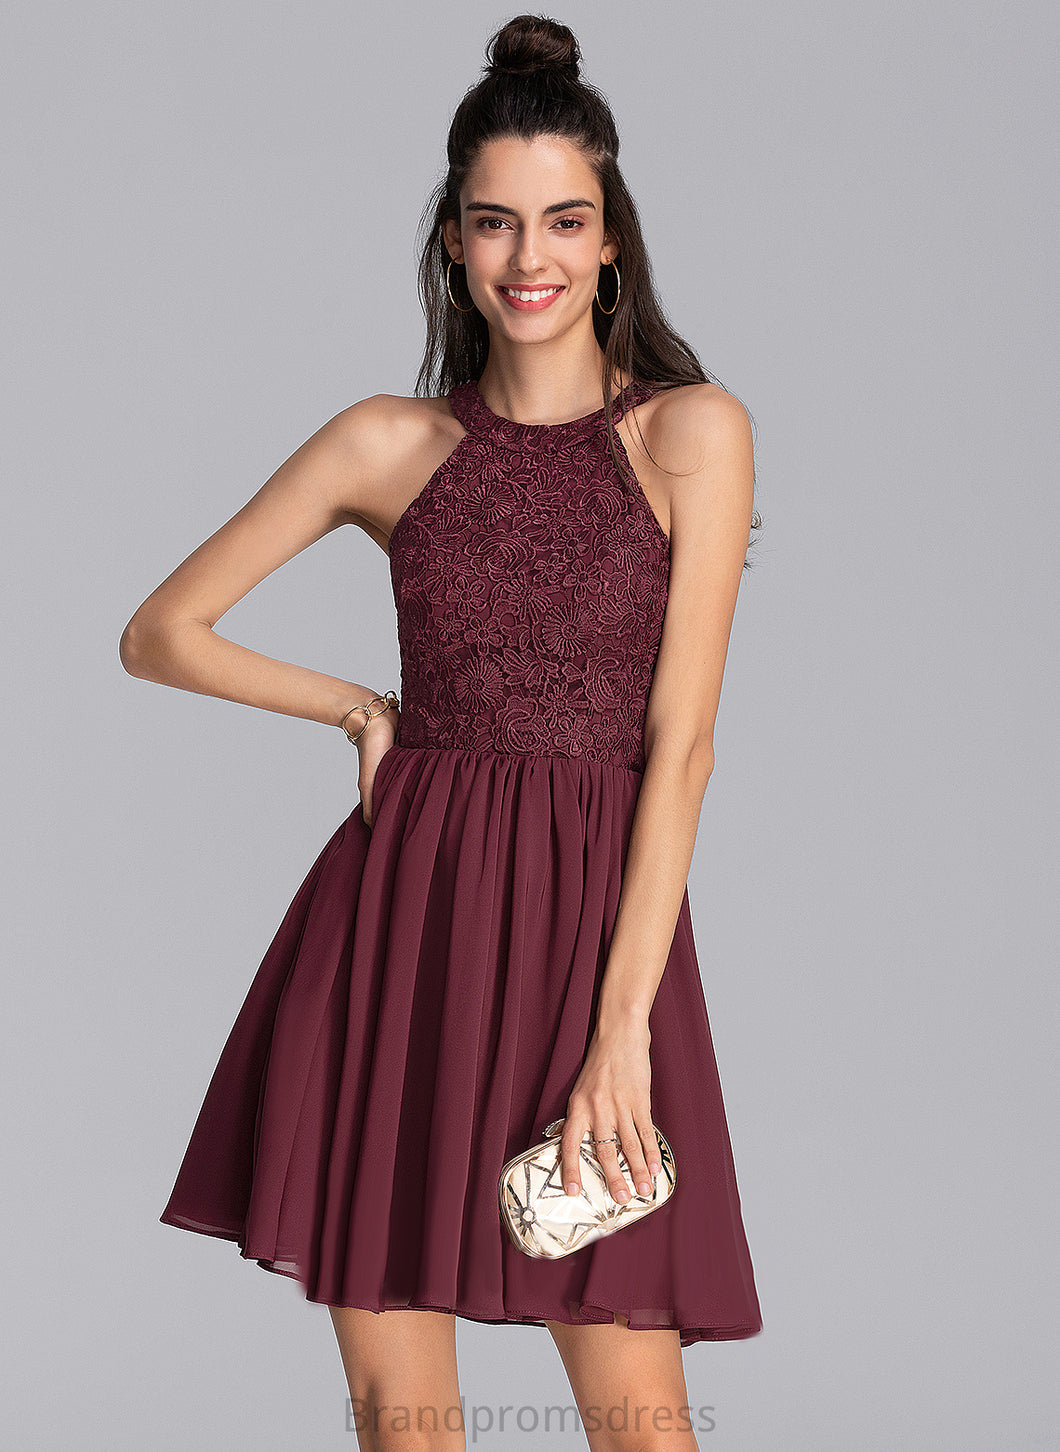 Dress Neck Homecoming Chiffon Homecoming Dresses A-Line Kaylen Scoop Short/Mini With Lace